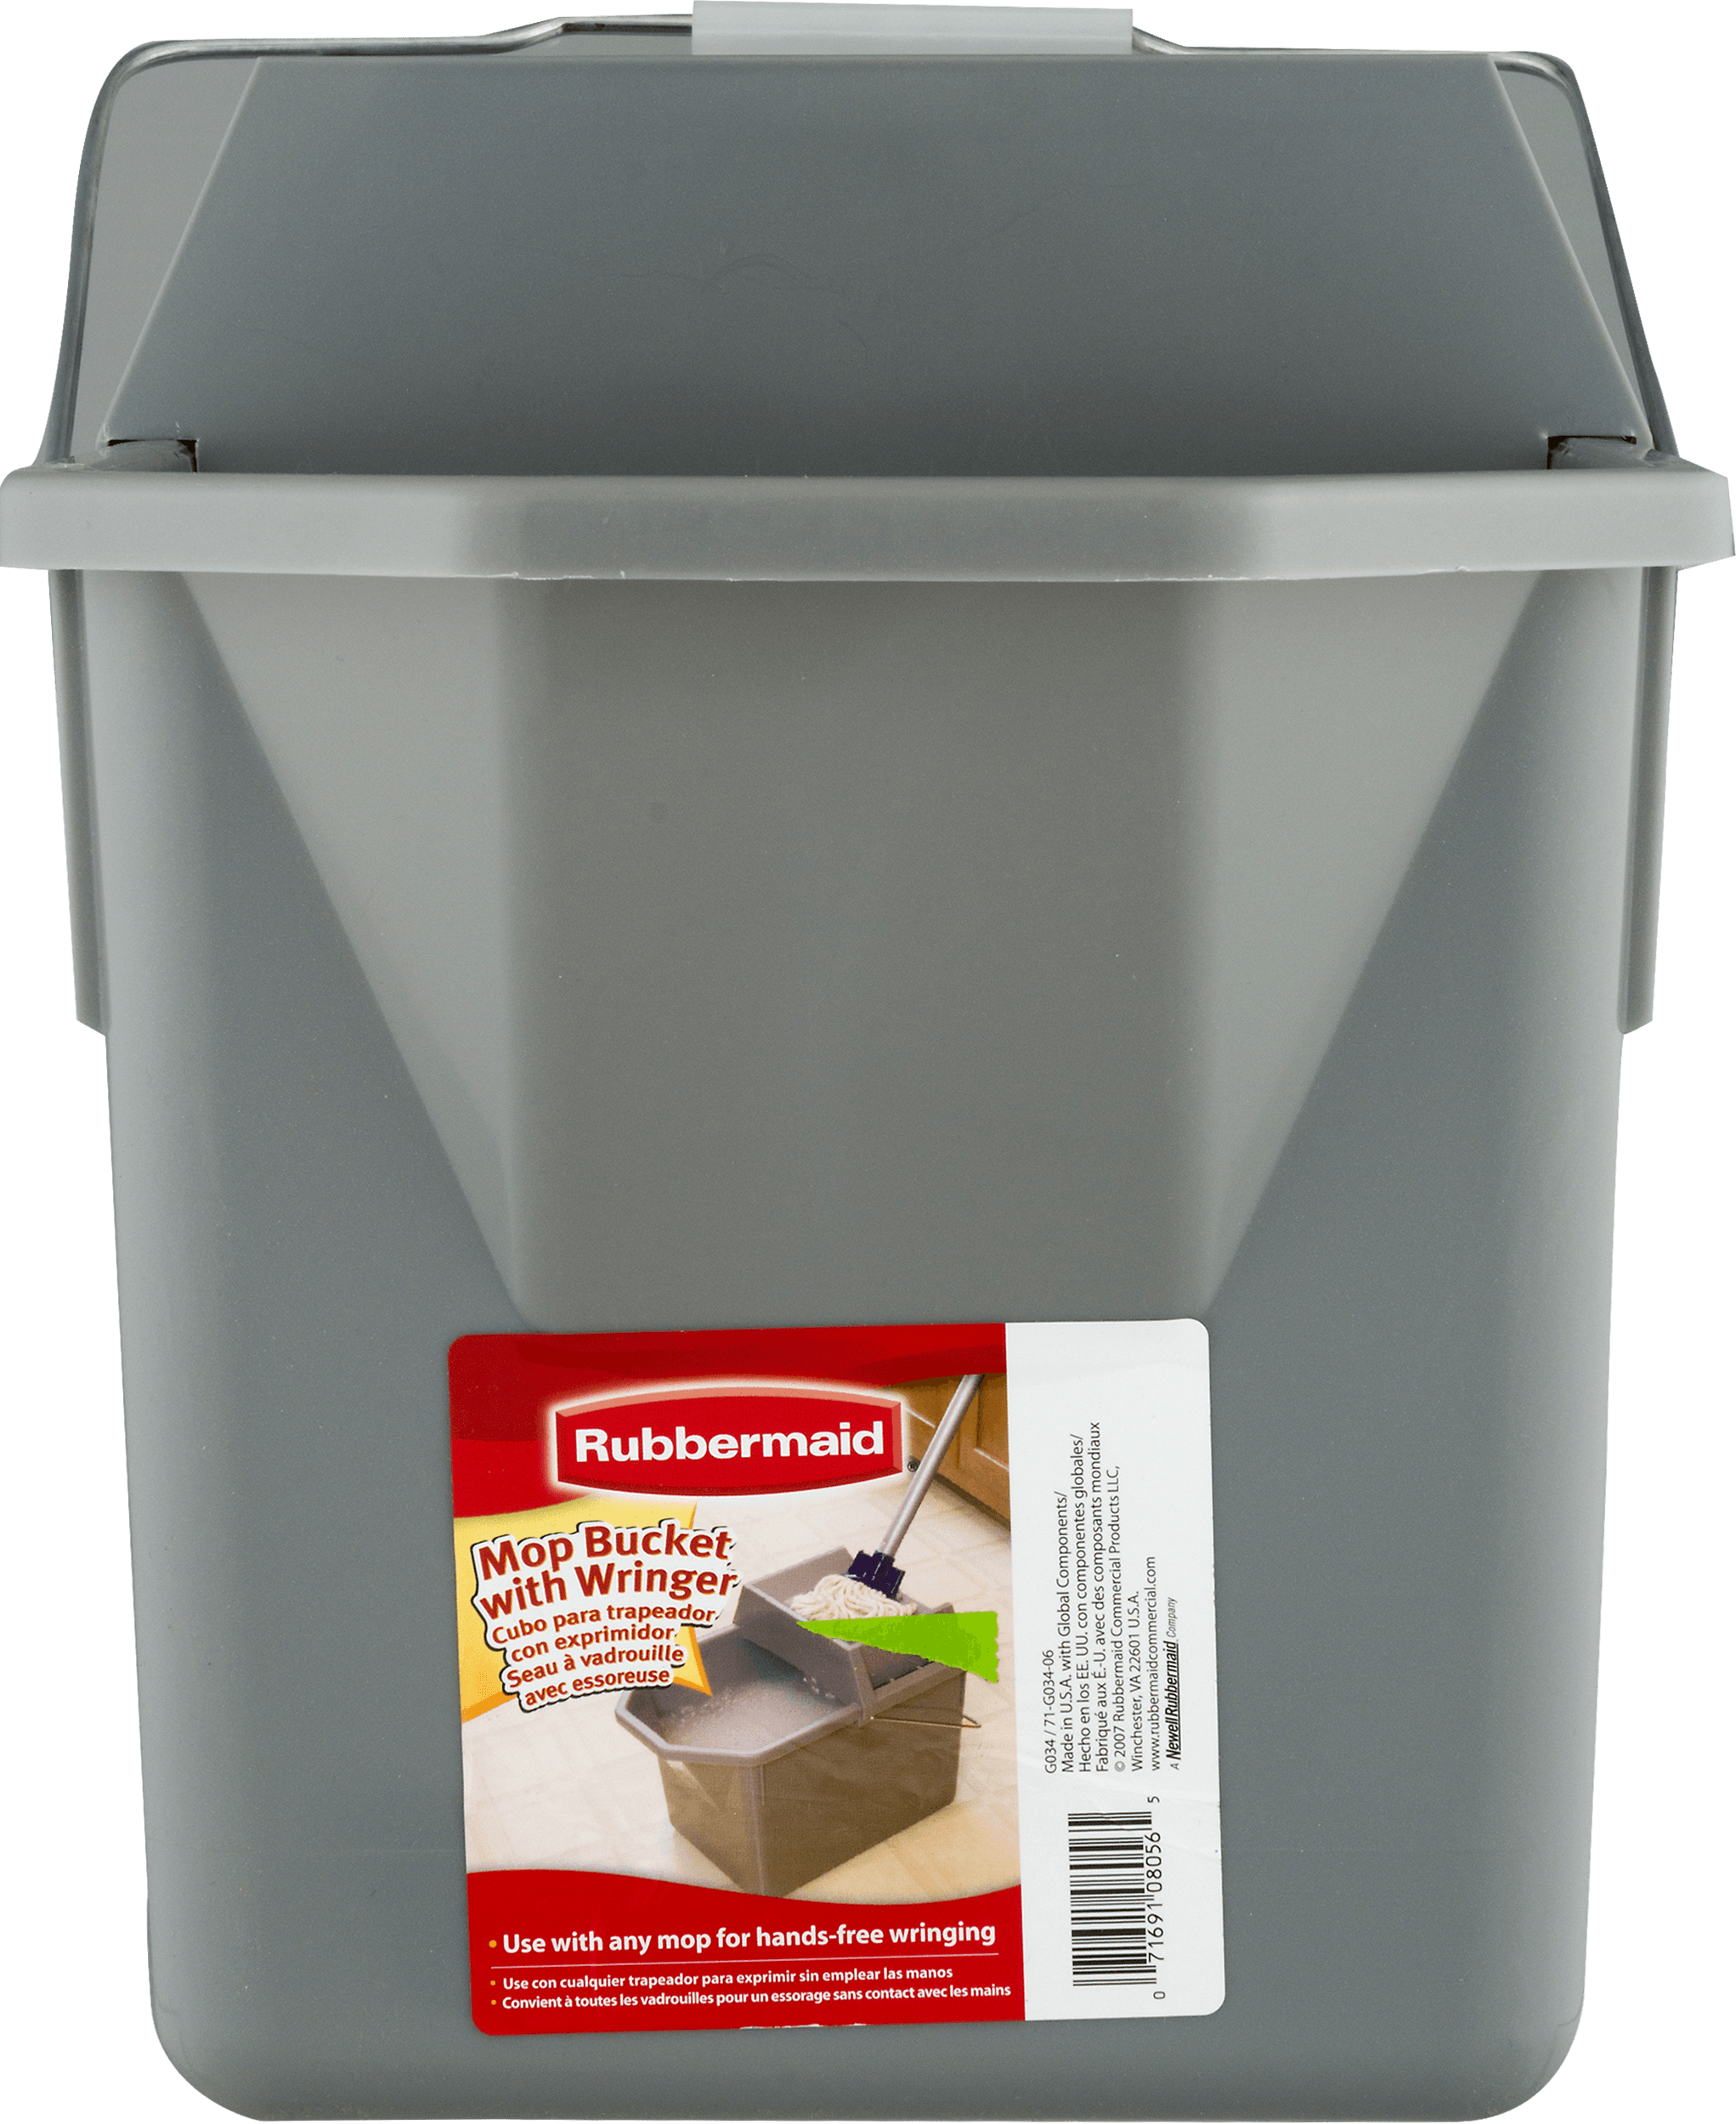 Rubbermaid Mop Bucket With Ringer, 1.0 CT - image 4 of 4